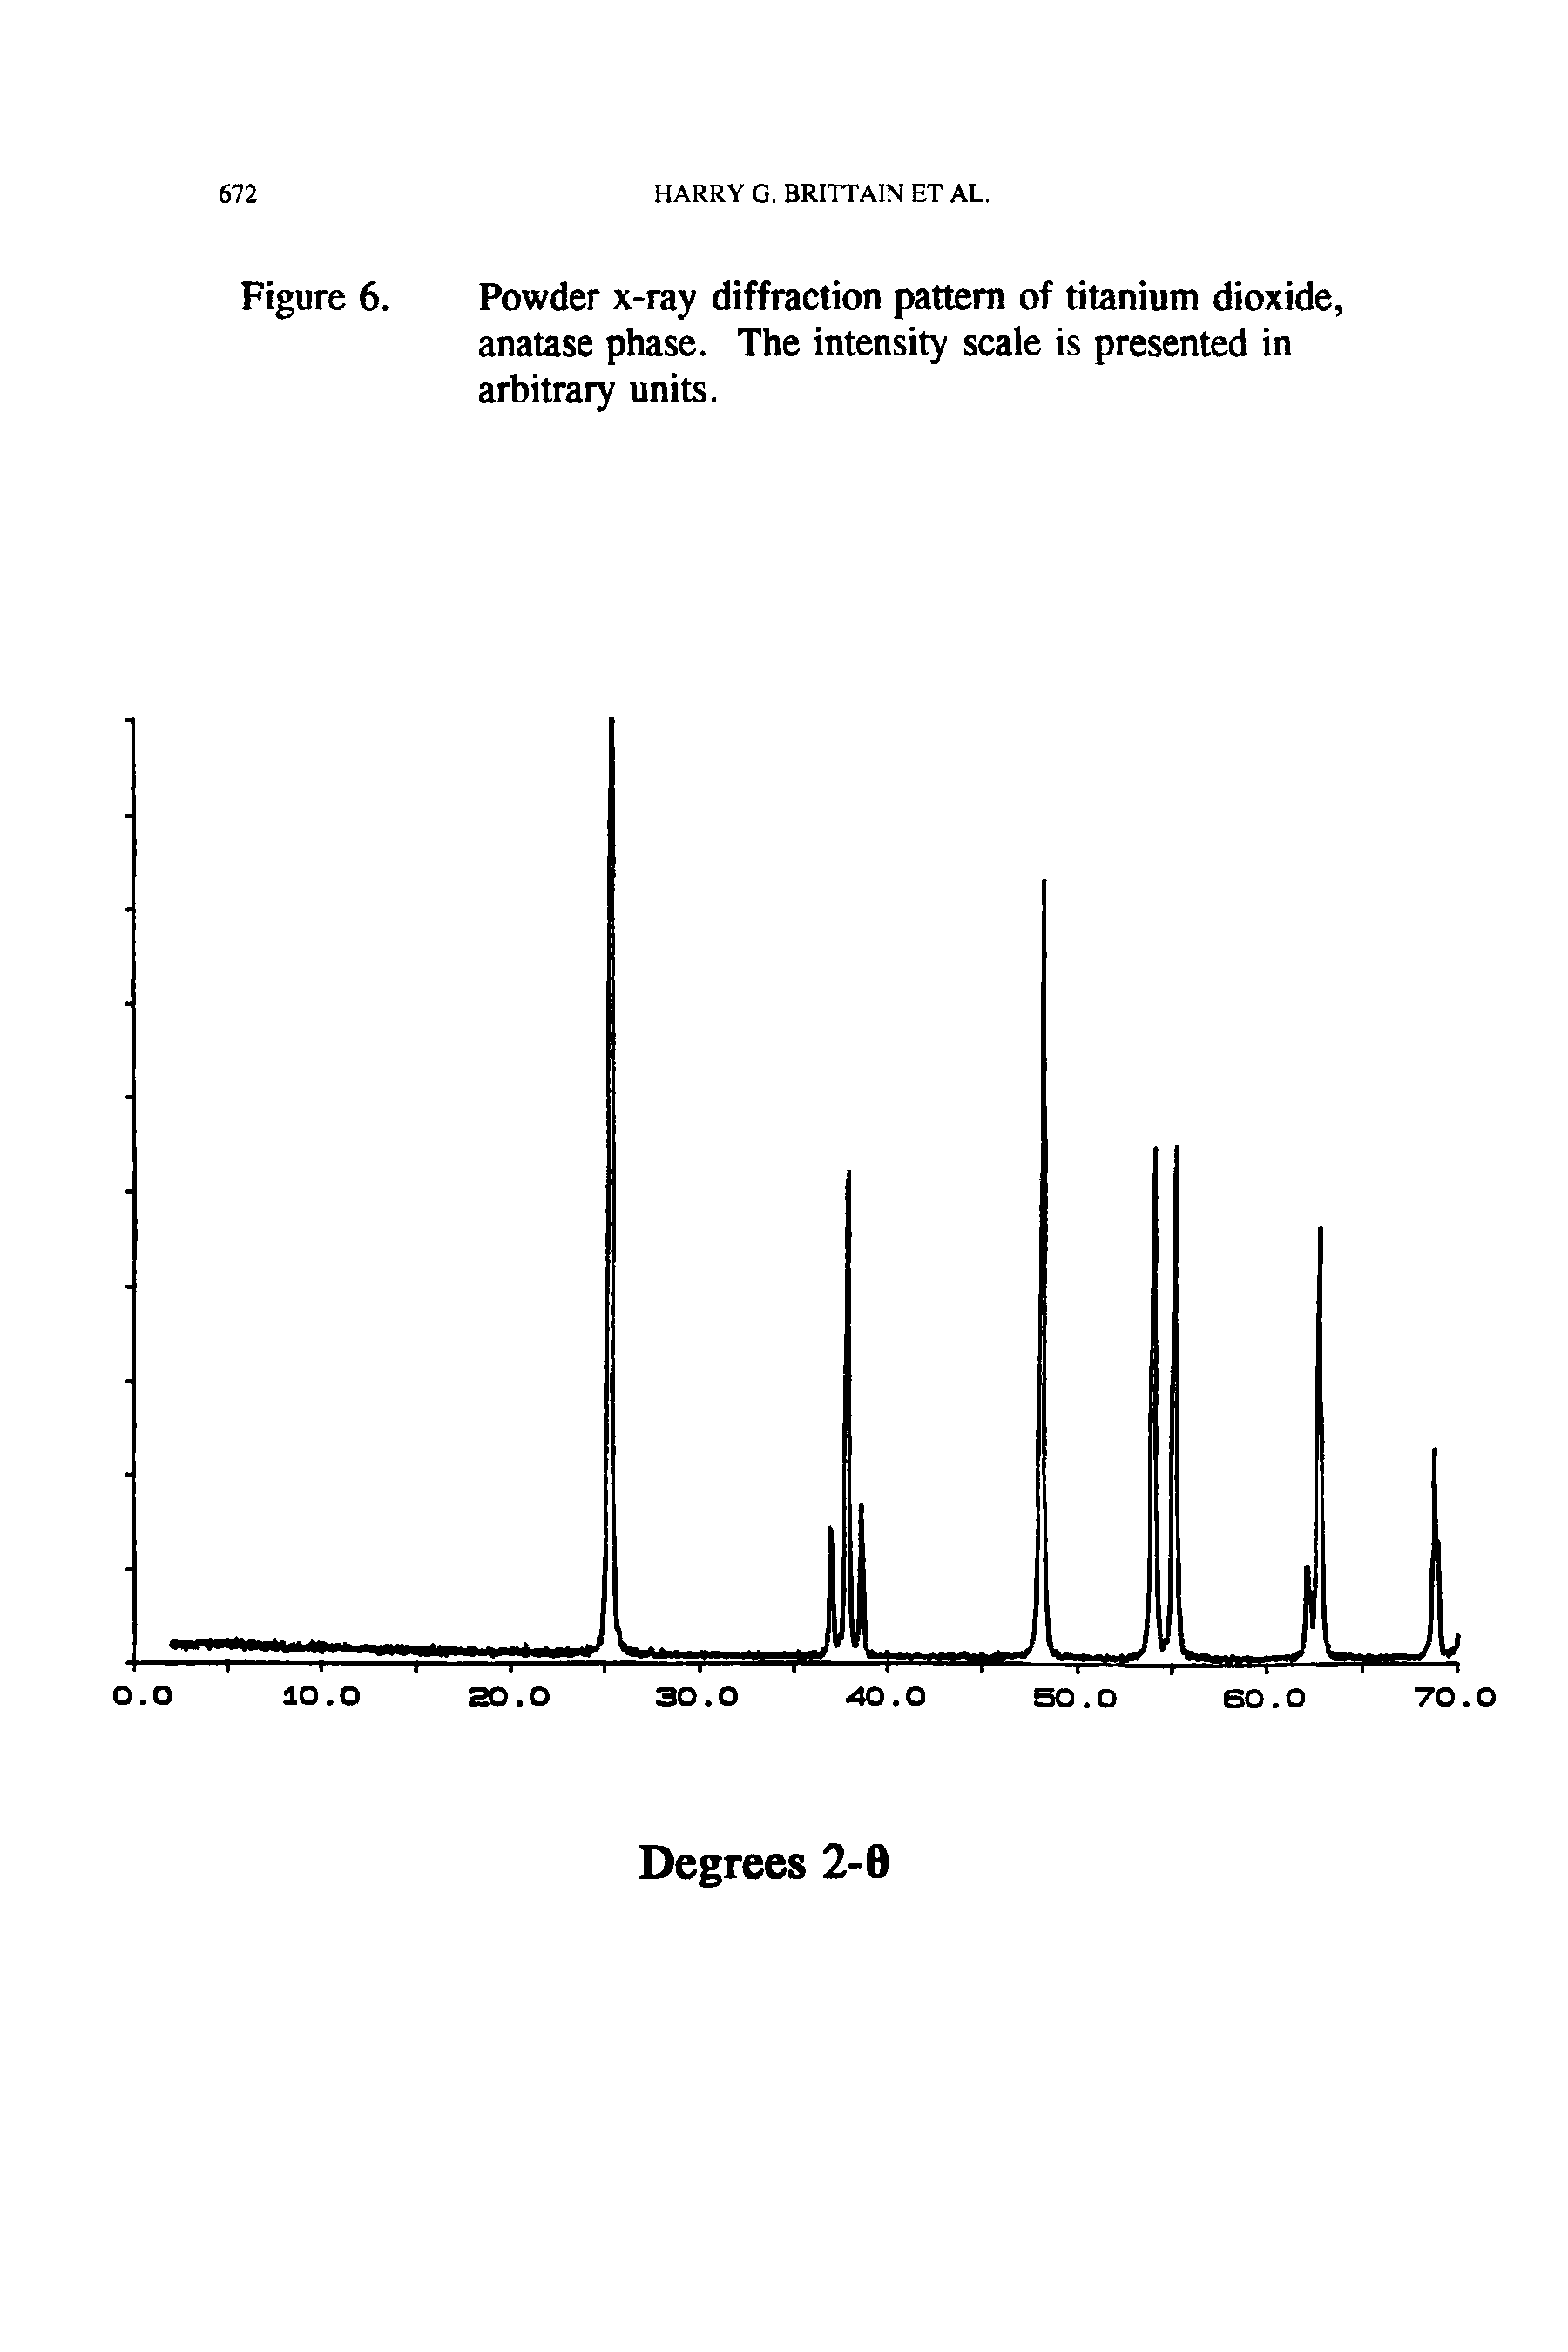 Figure 6. Powder x-ray diffraction pattern of titanium dioxide, anatase phase. The intensity scale is presented in arbitrary units.